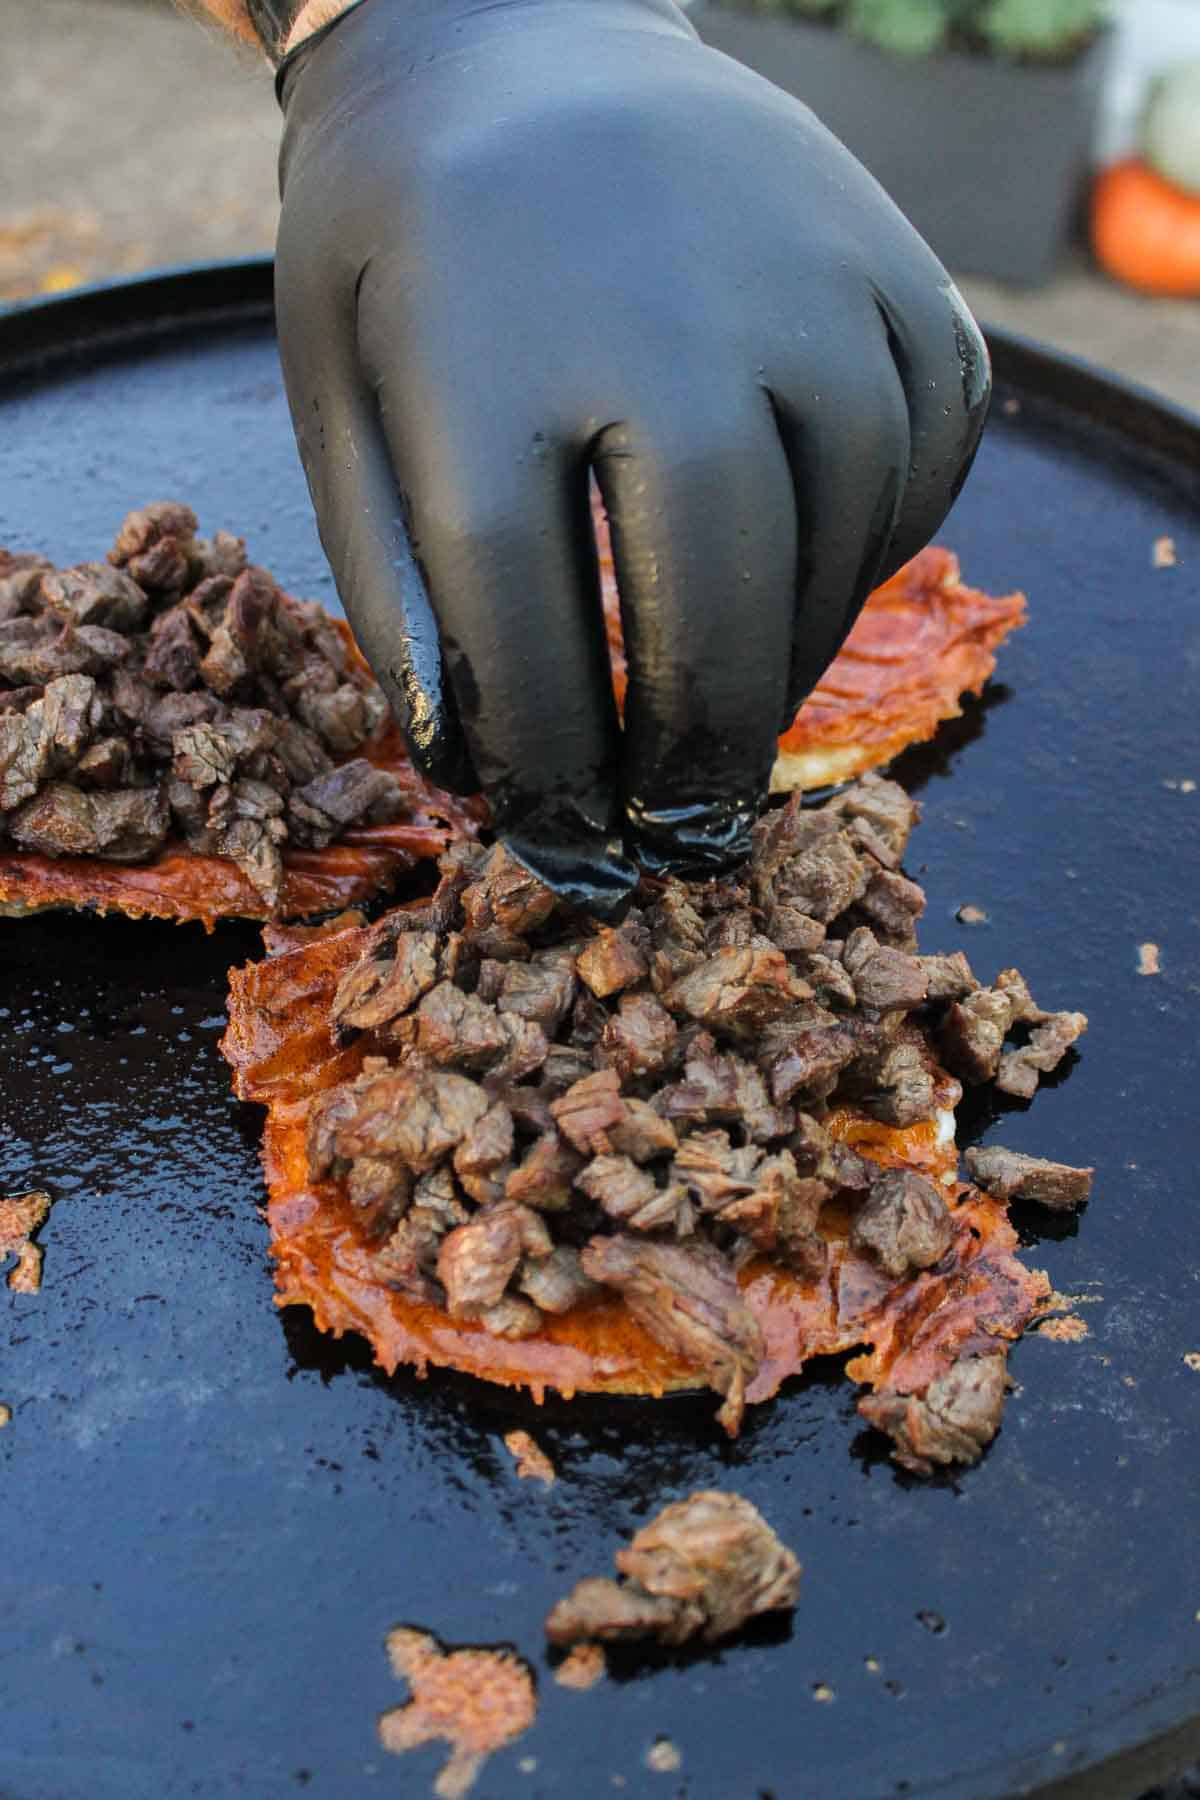 Placing the steak on top of the tortillas with melted cheese.